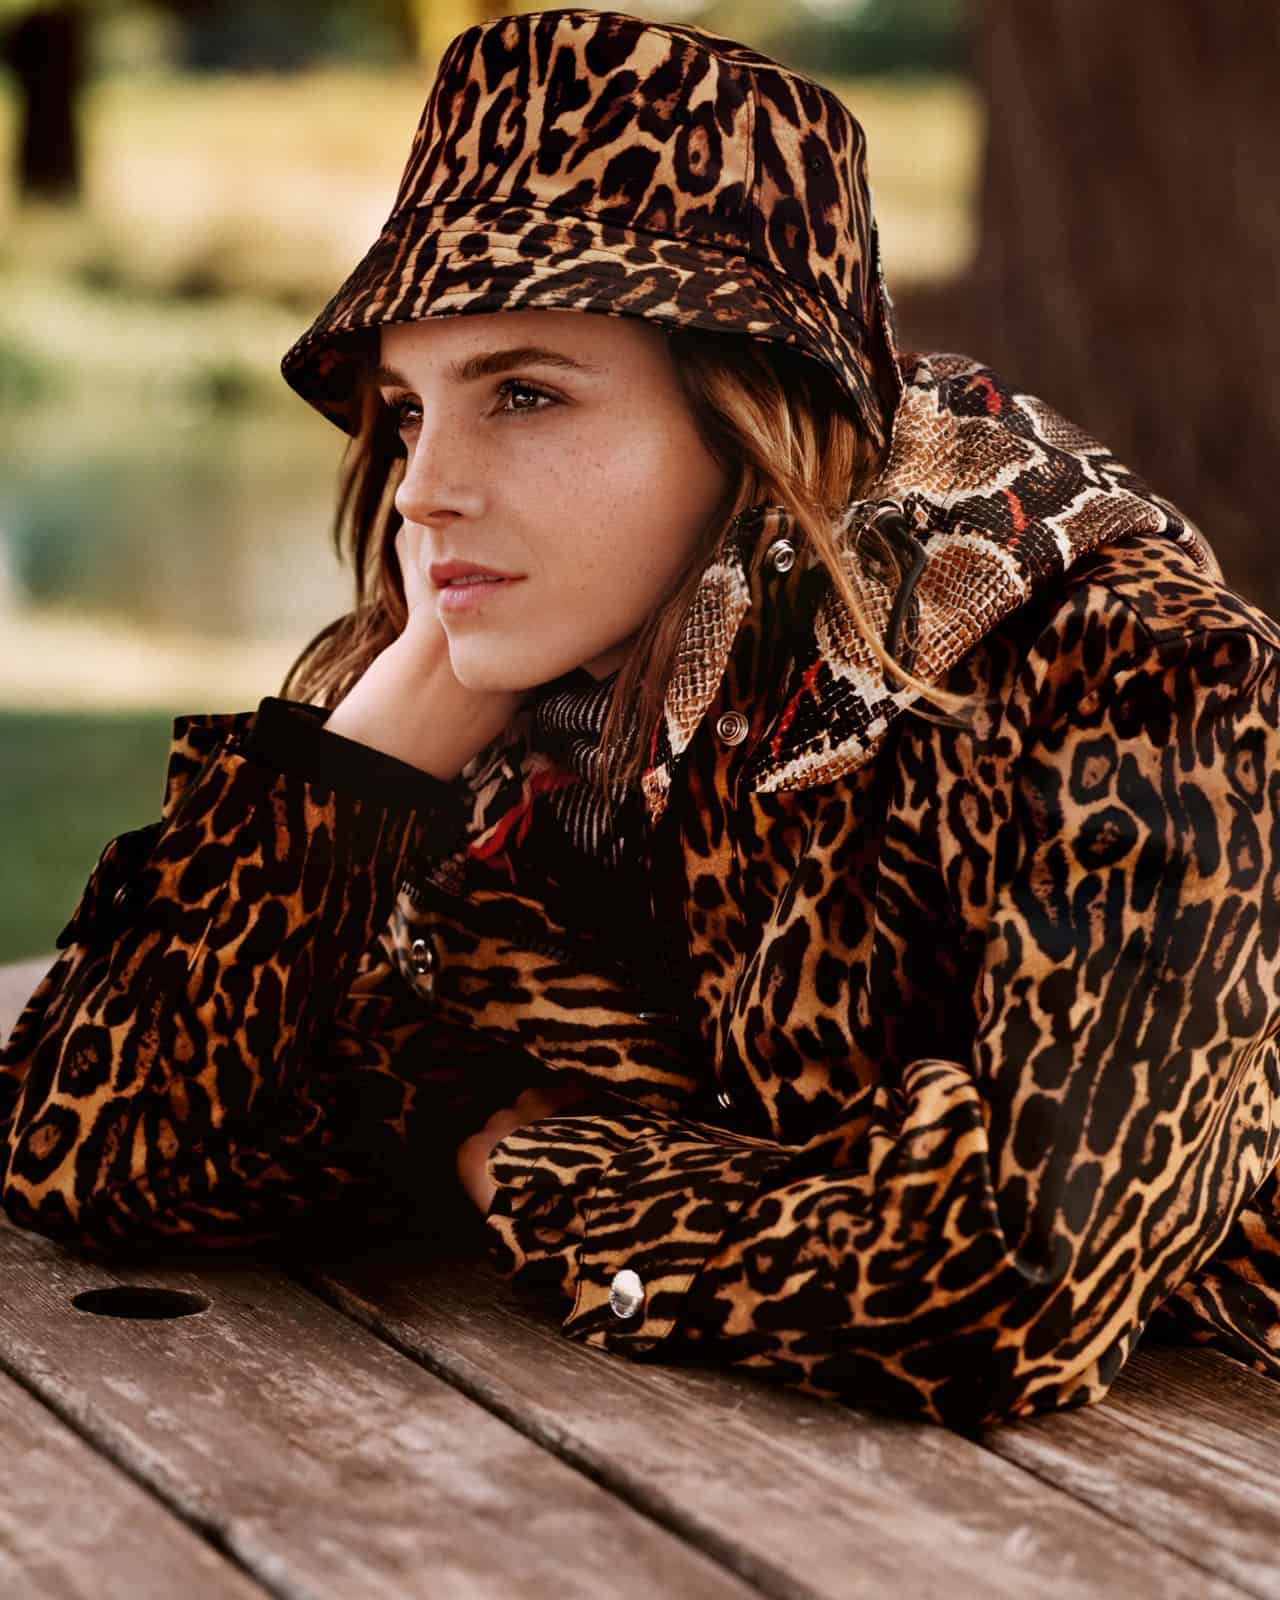 Emma Watson Posing in a Breathtaking Photo Session for Vogue UK